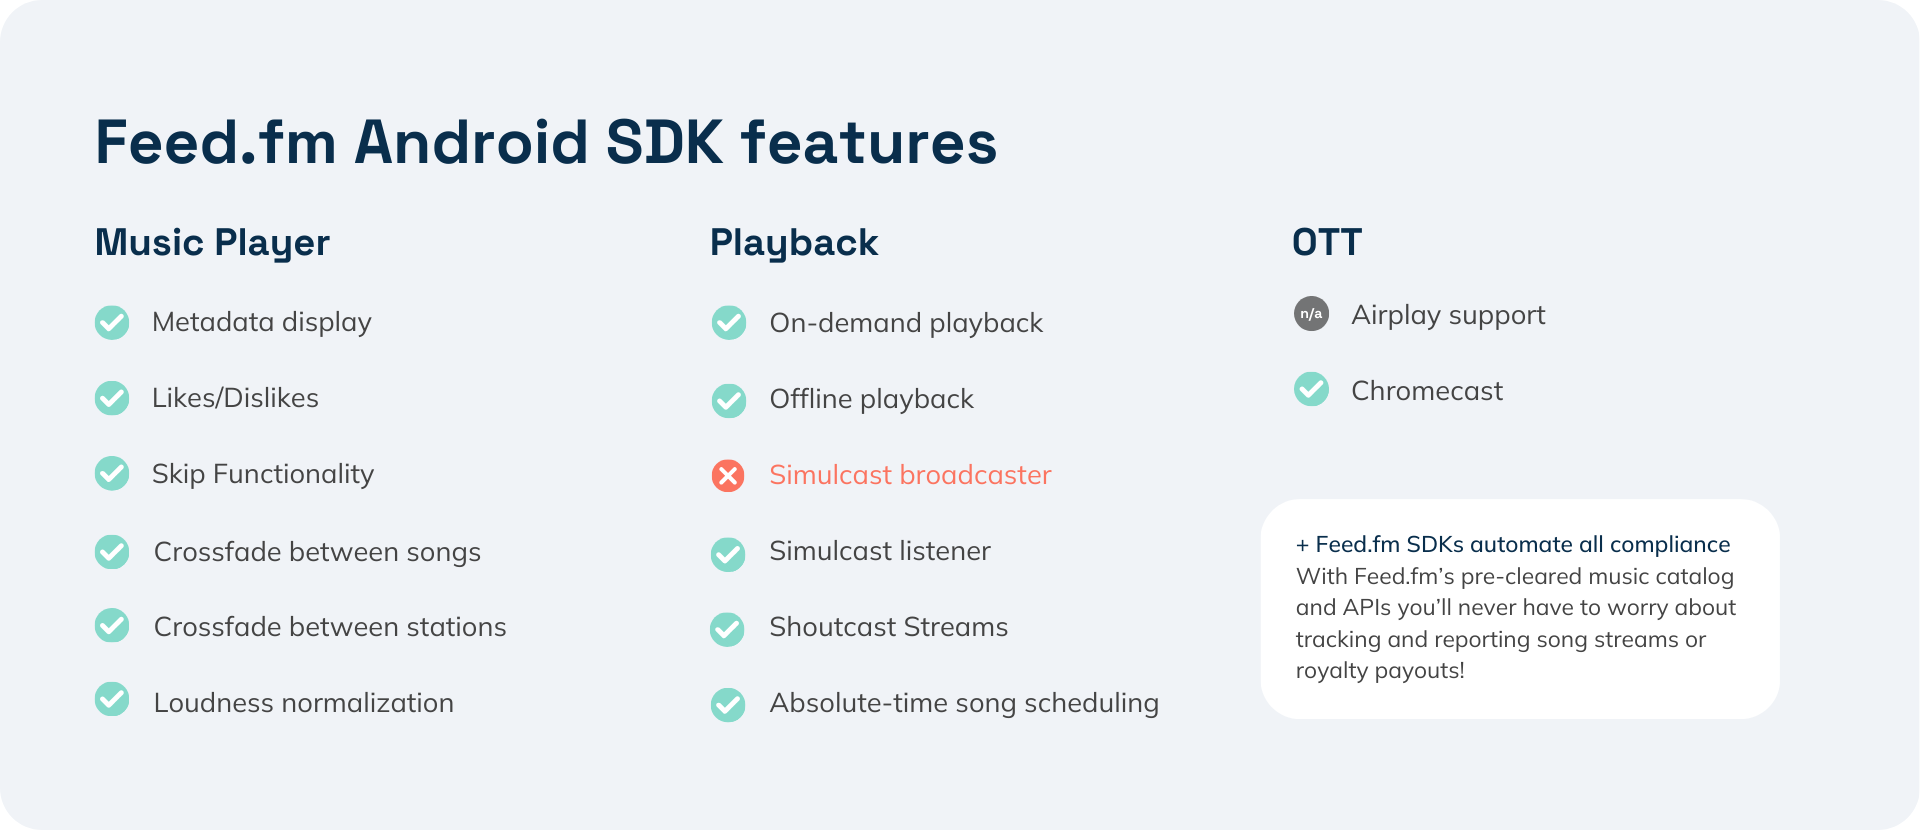 Feed.fm Andriod SDK features